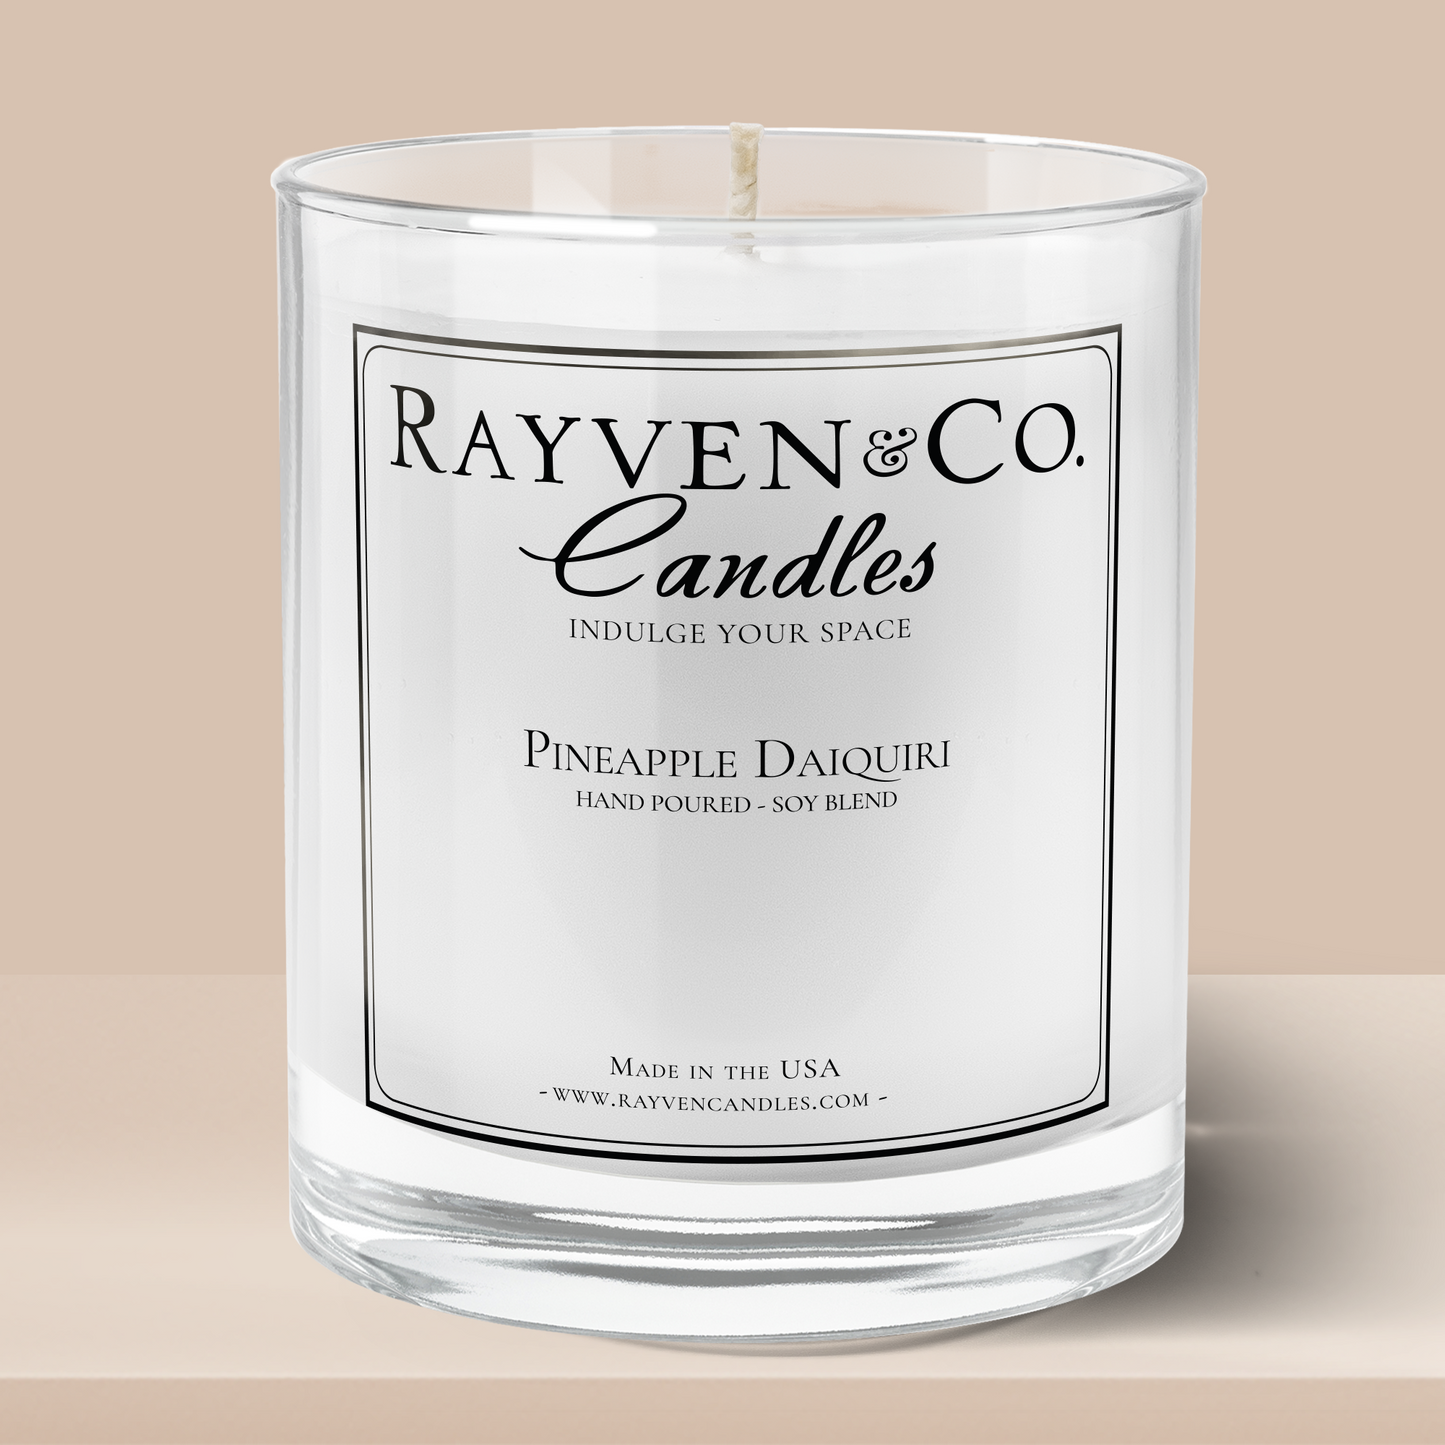 Candles that smell like Pineapple Daiquiris